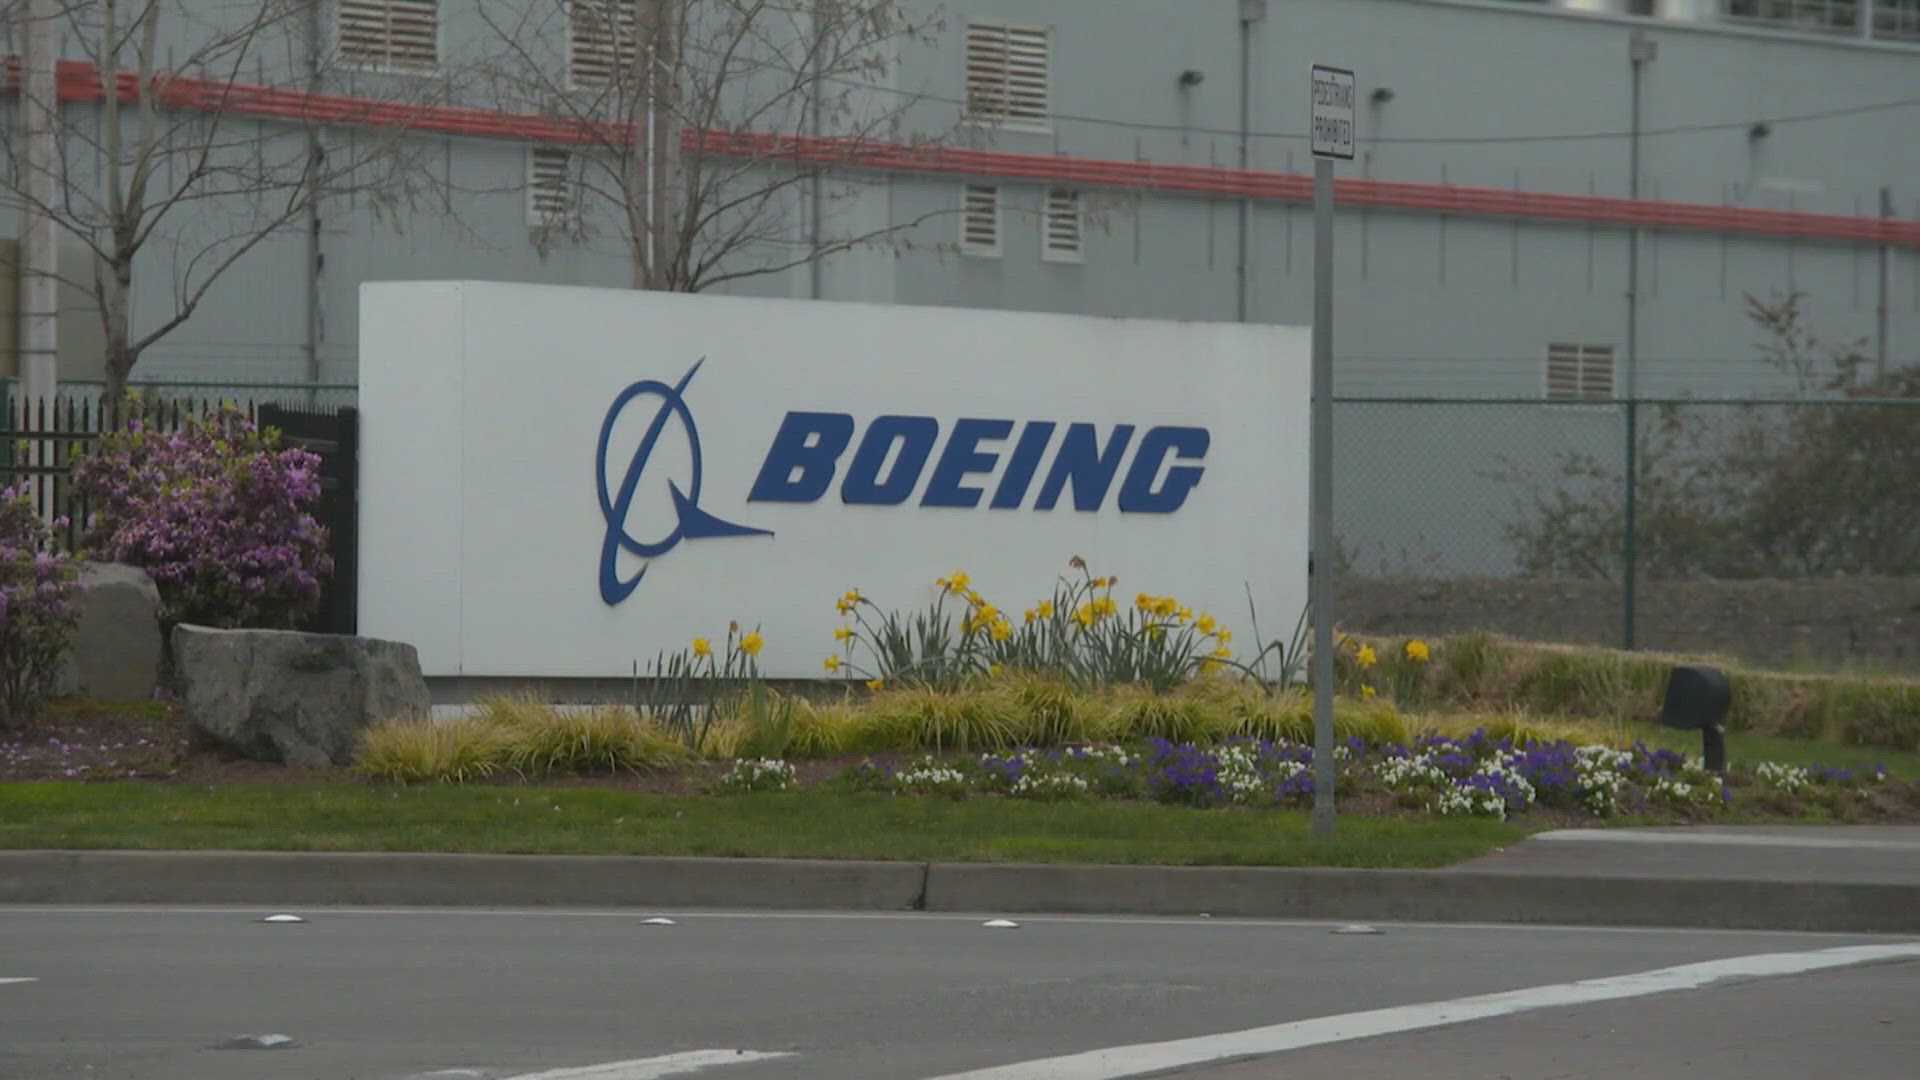 A current Boeing quality assurance inspector alleges that Boeing is using out-of-specification and damaged parts on new airplane builds